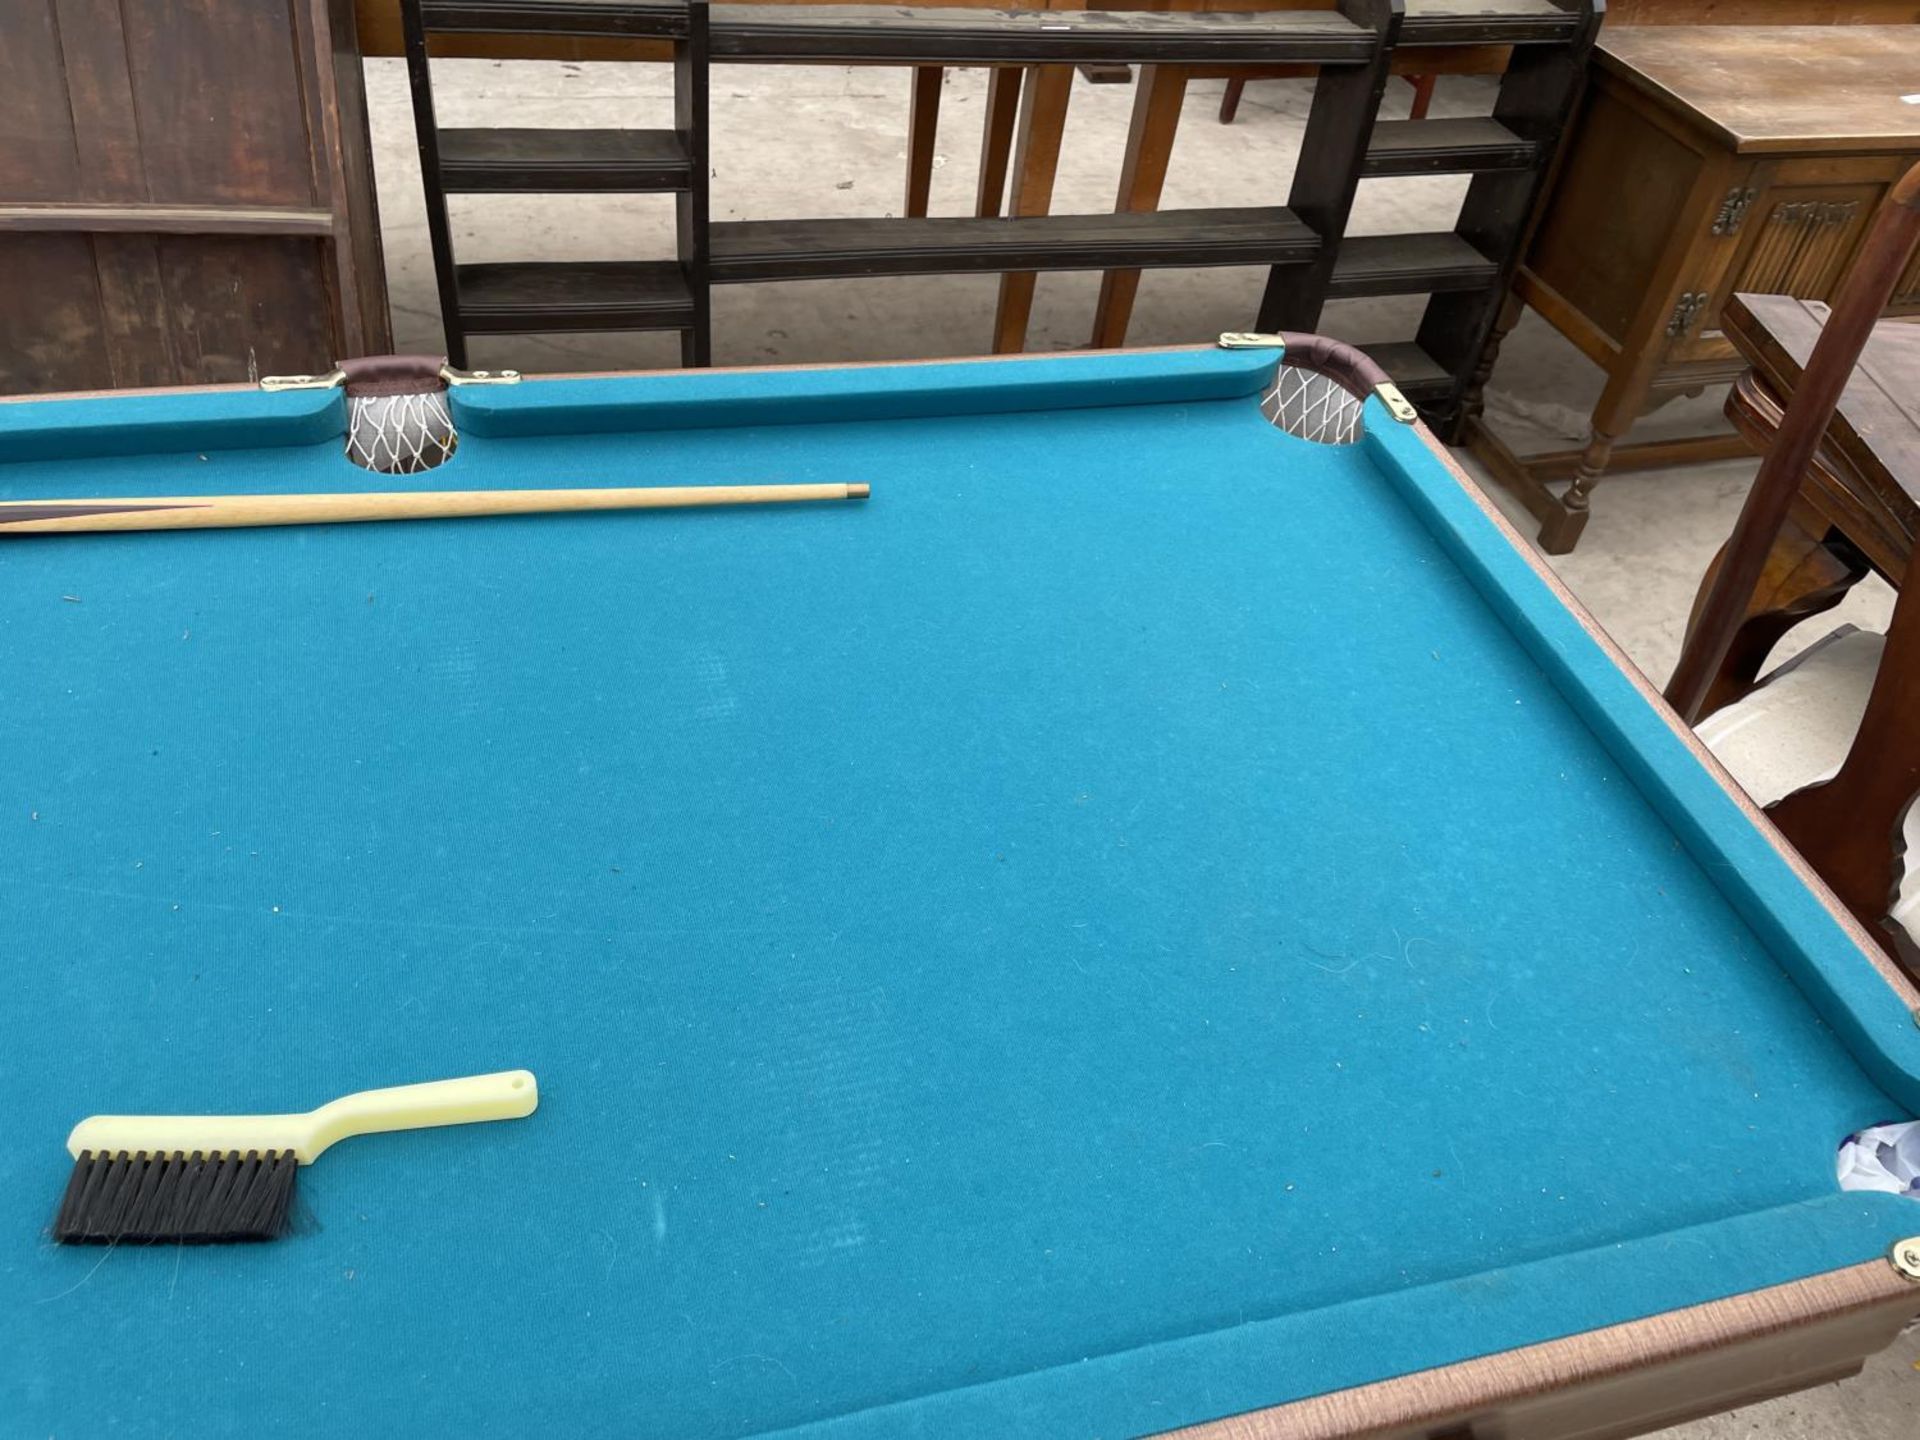 A MODERN SOLEX POOL/SNOOKER TABLE COMPLETE WITH BALLS AND ONE CUE, 60X32" - Image 3 of 5